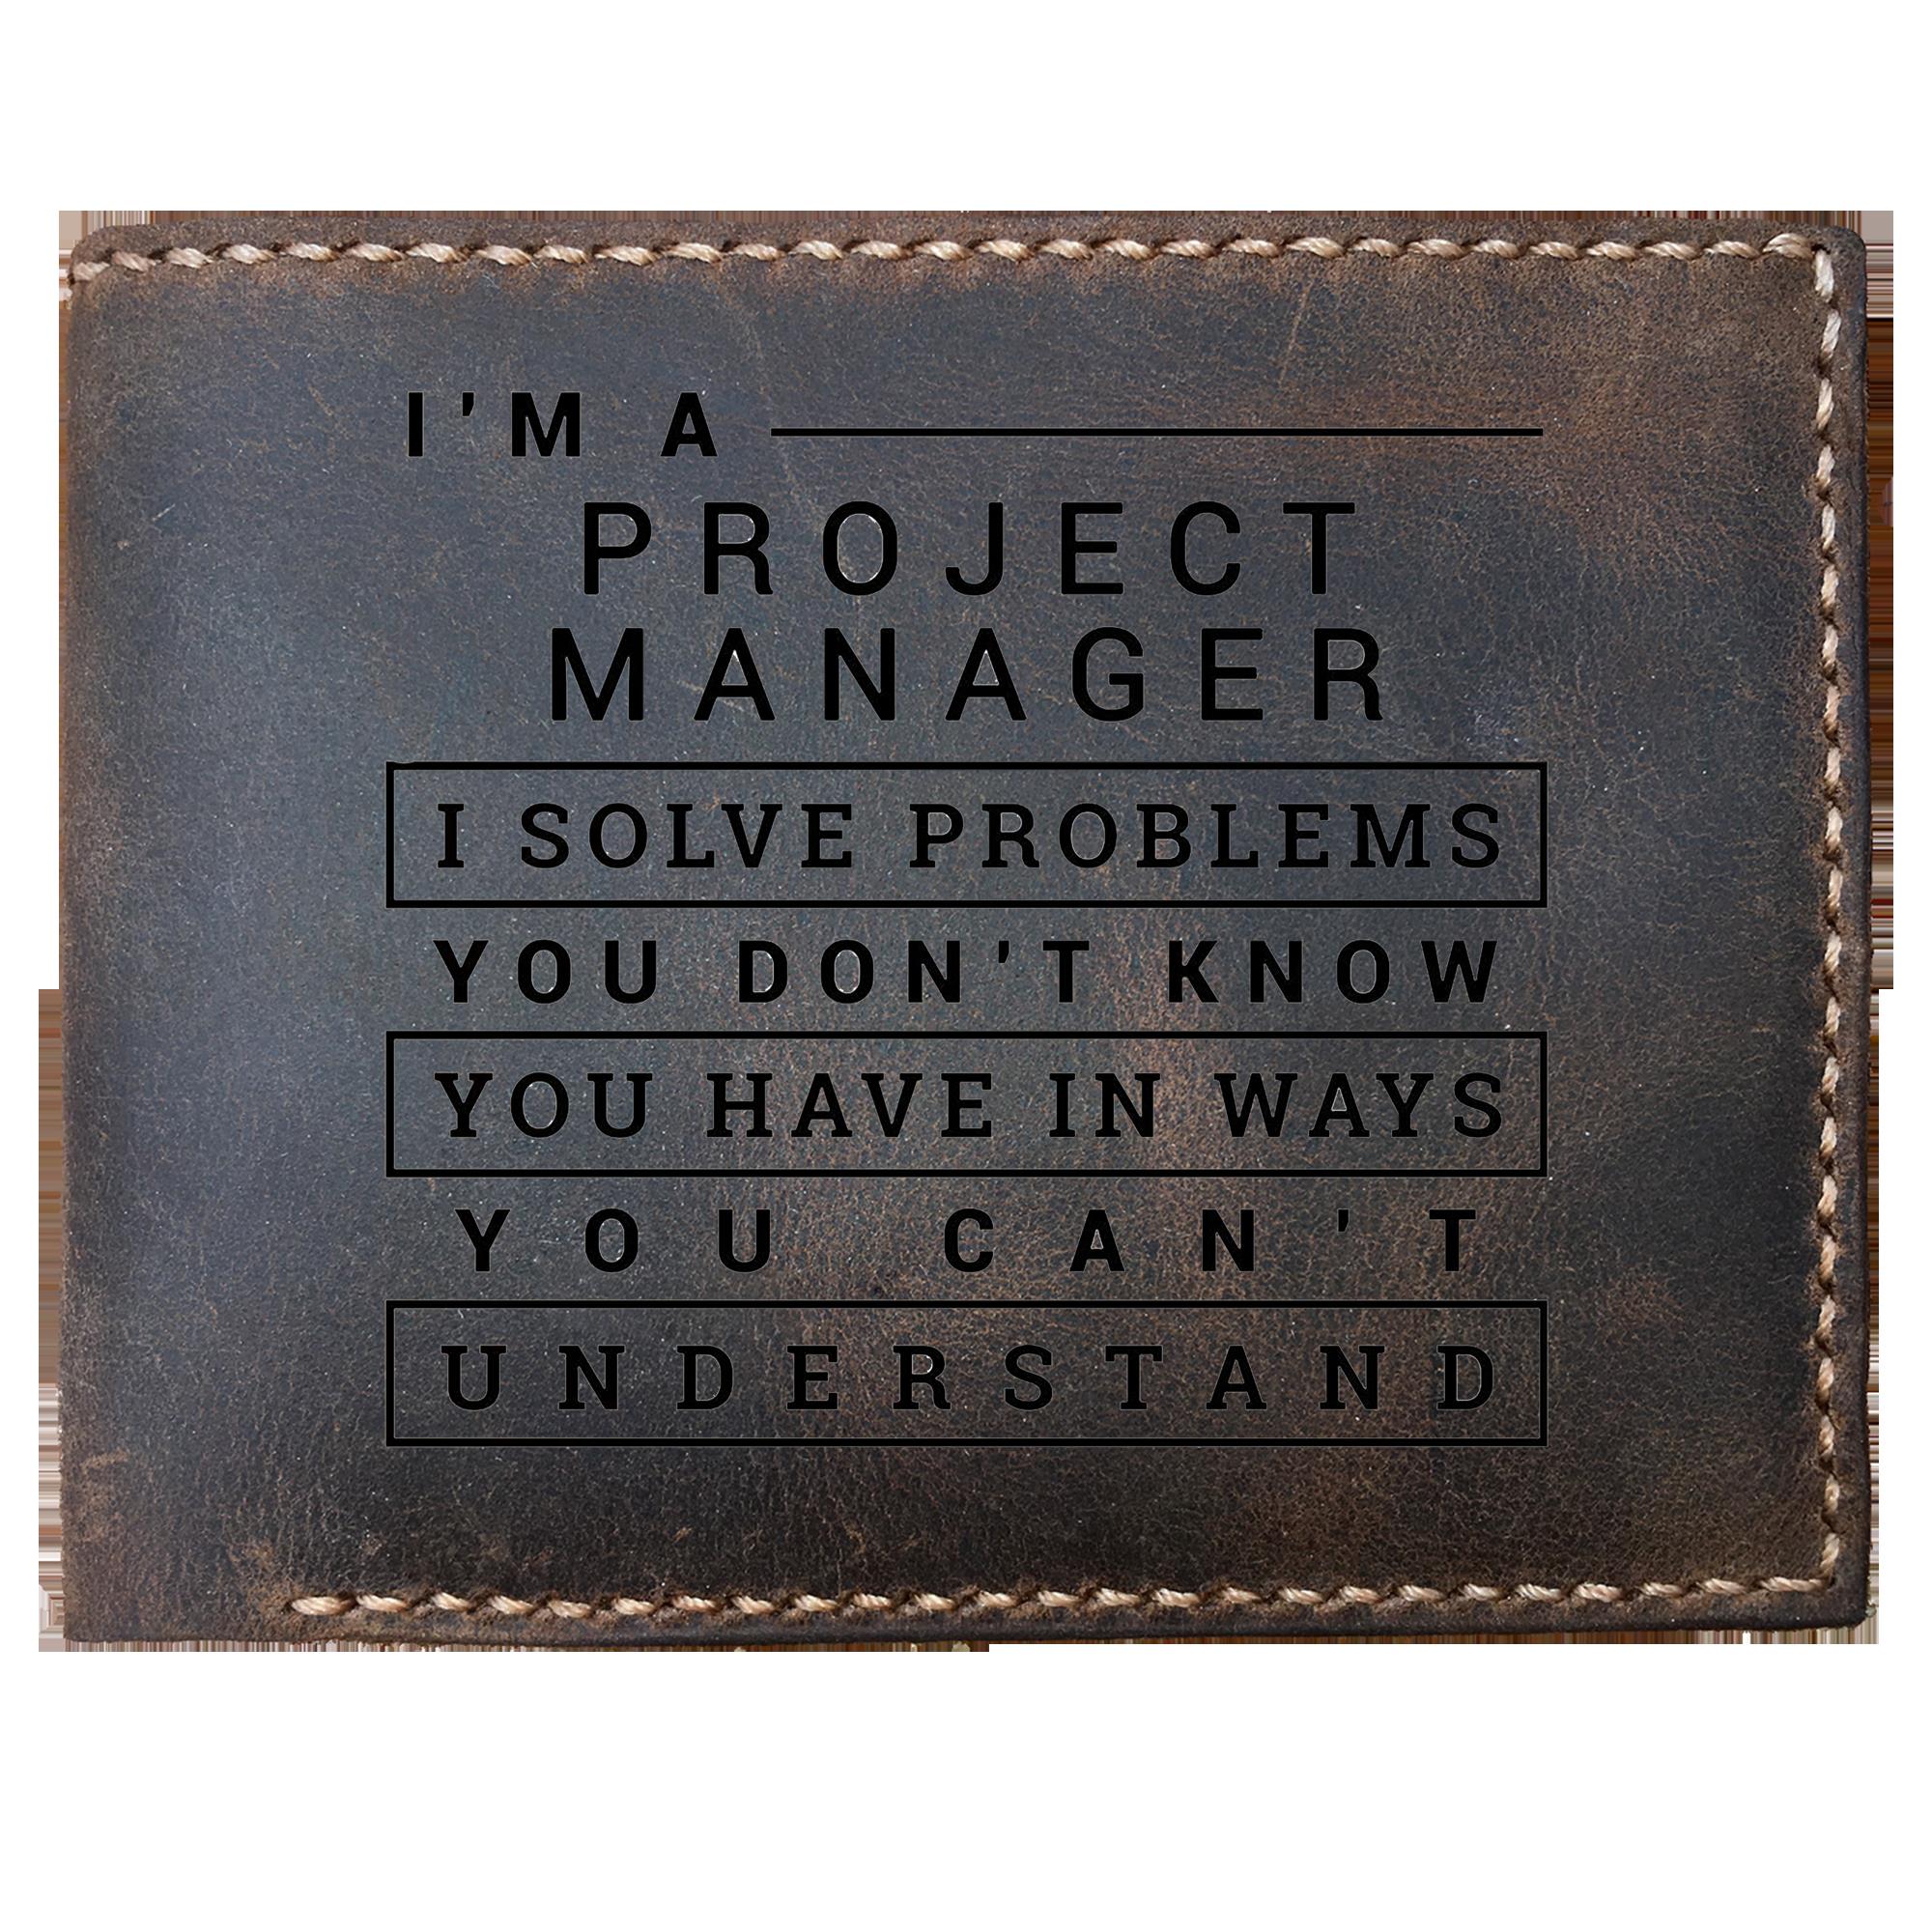 Skitongifts Funny Custom Laser Engraved Bifold Leather Wallet, Project Manager For Planners, Office Coworkers, I'm A Project Manager